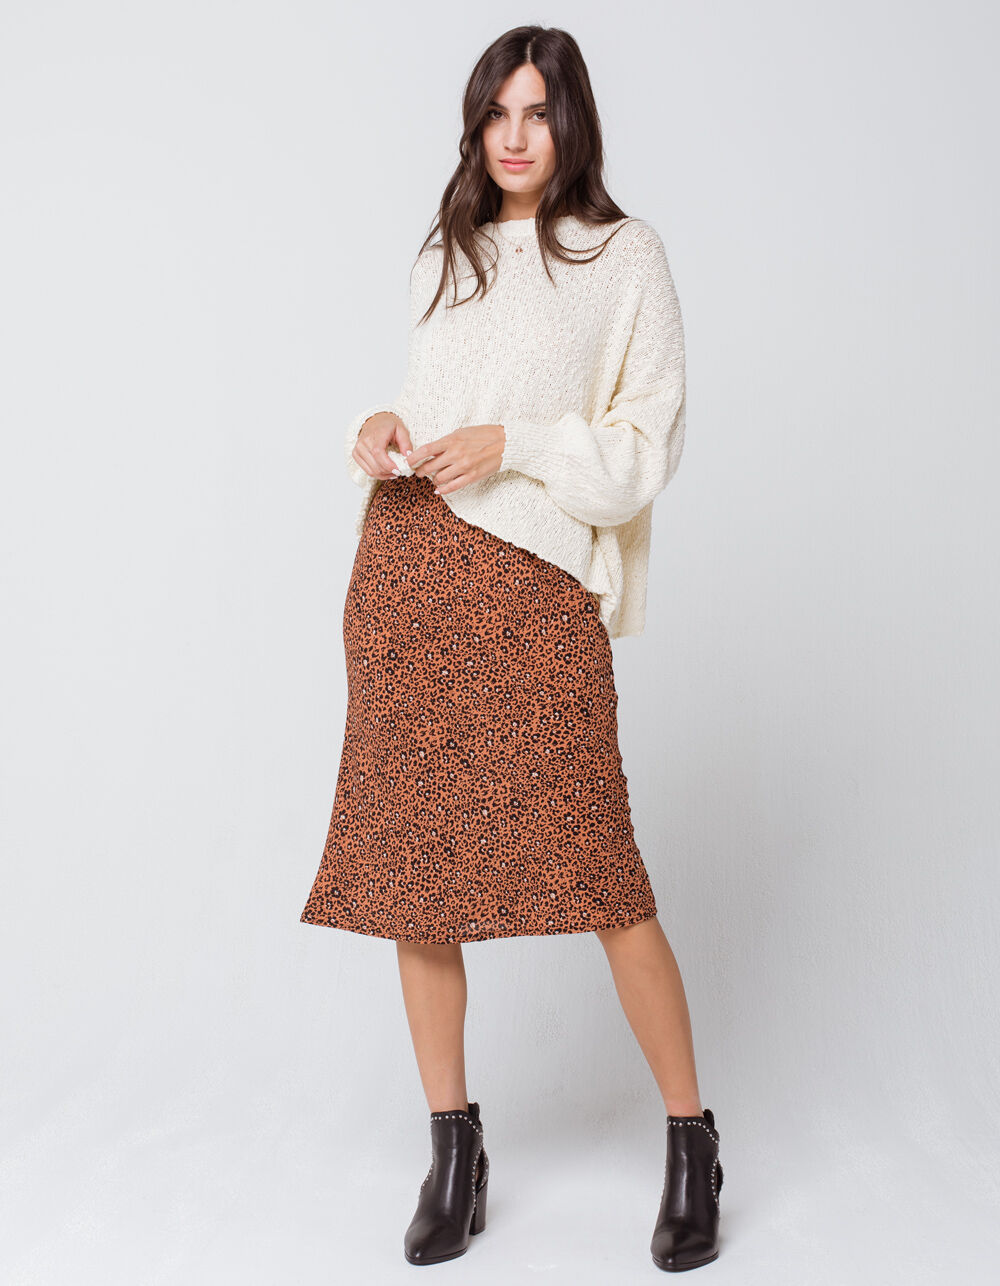 SKY AND SPARROW Leopard Midi Skirt image number 0